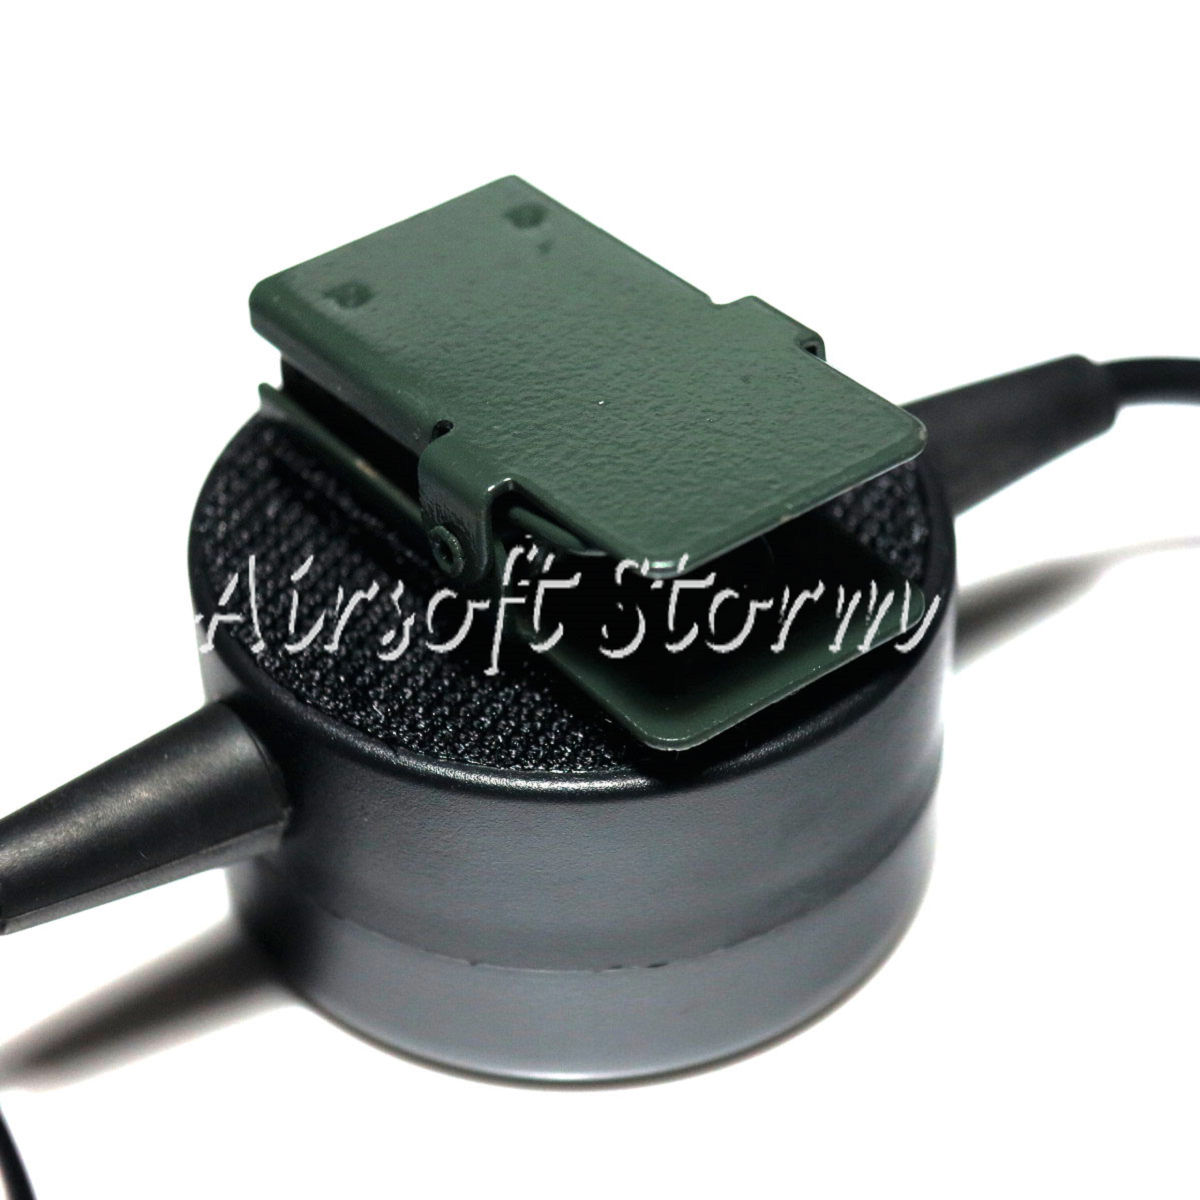 Airsoft Gear SWAT Element TCI Headset PTT for ICOM 2 Pin Radio